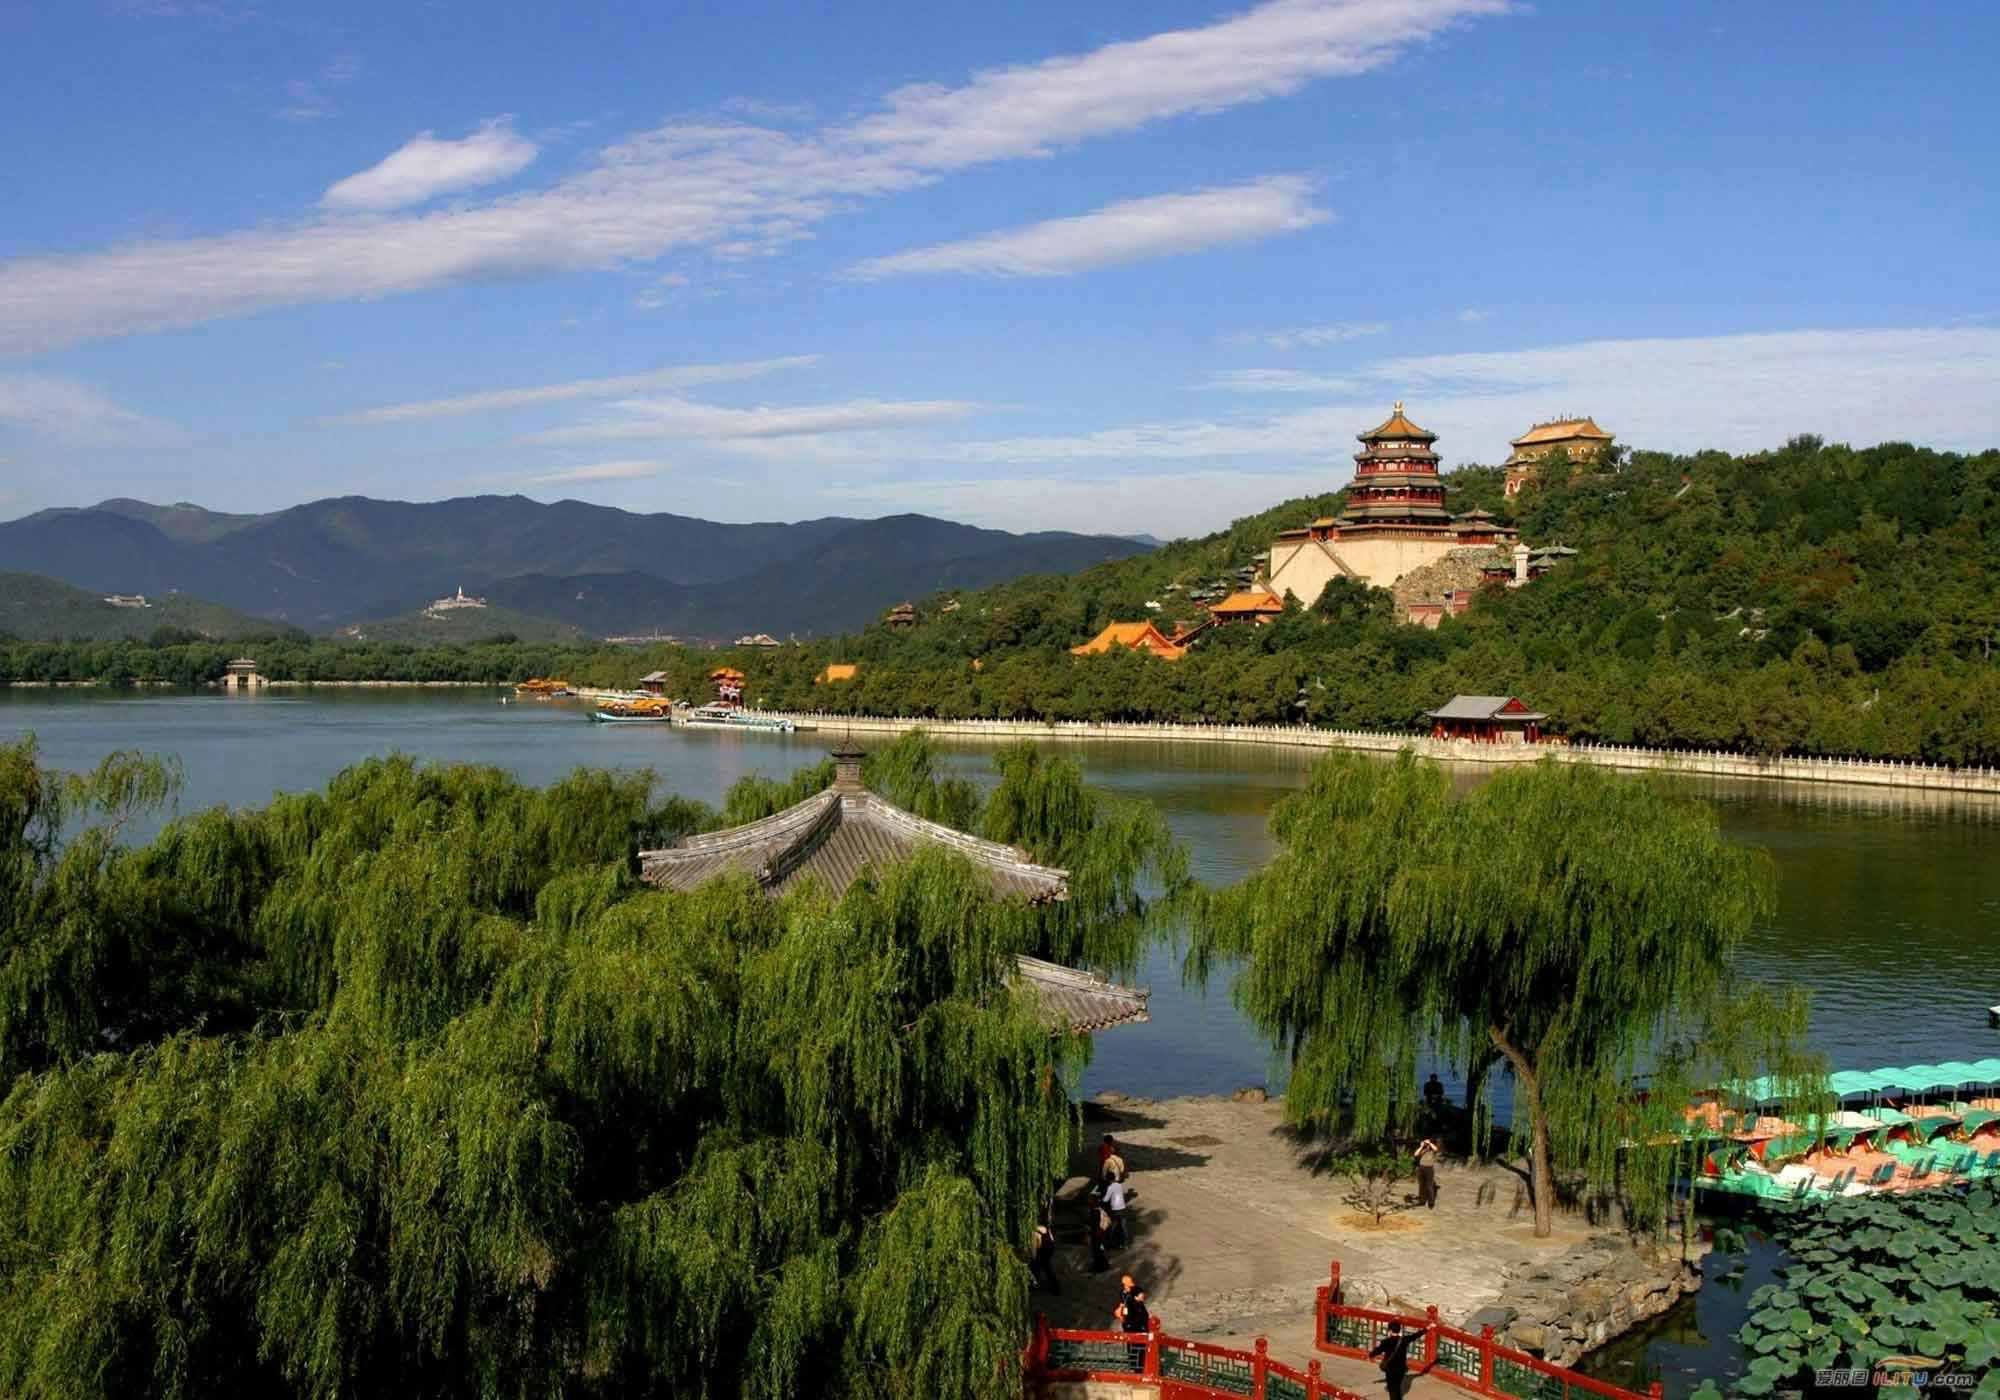 Beijing private tour of Badaling Great Wall and Summer Palace in Beijing Musement